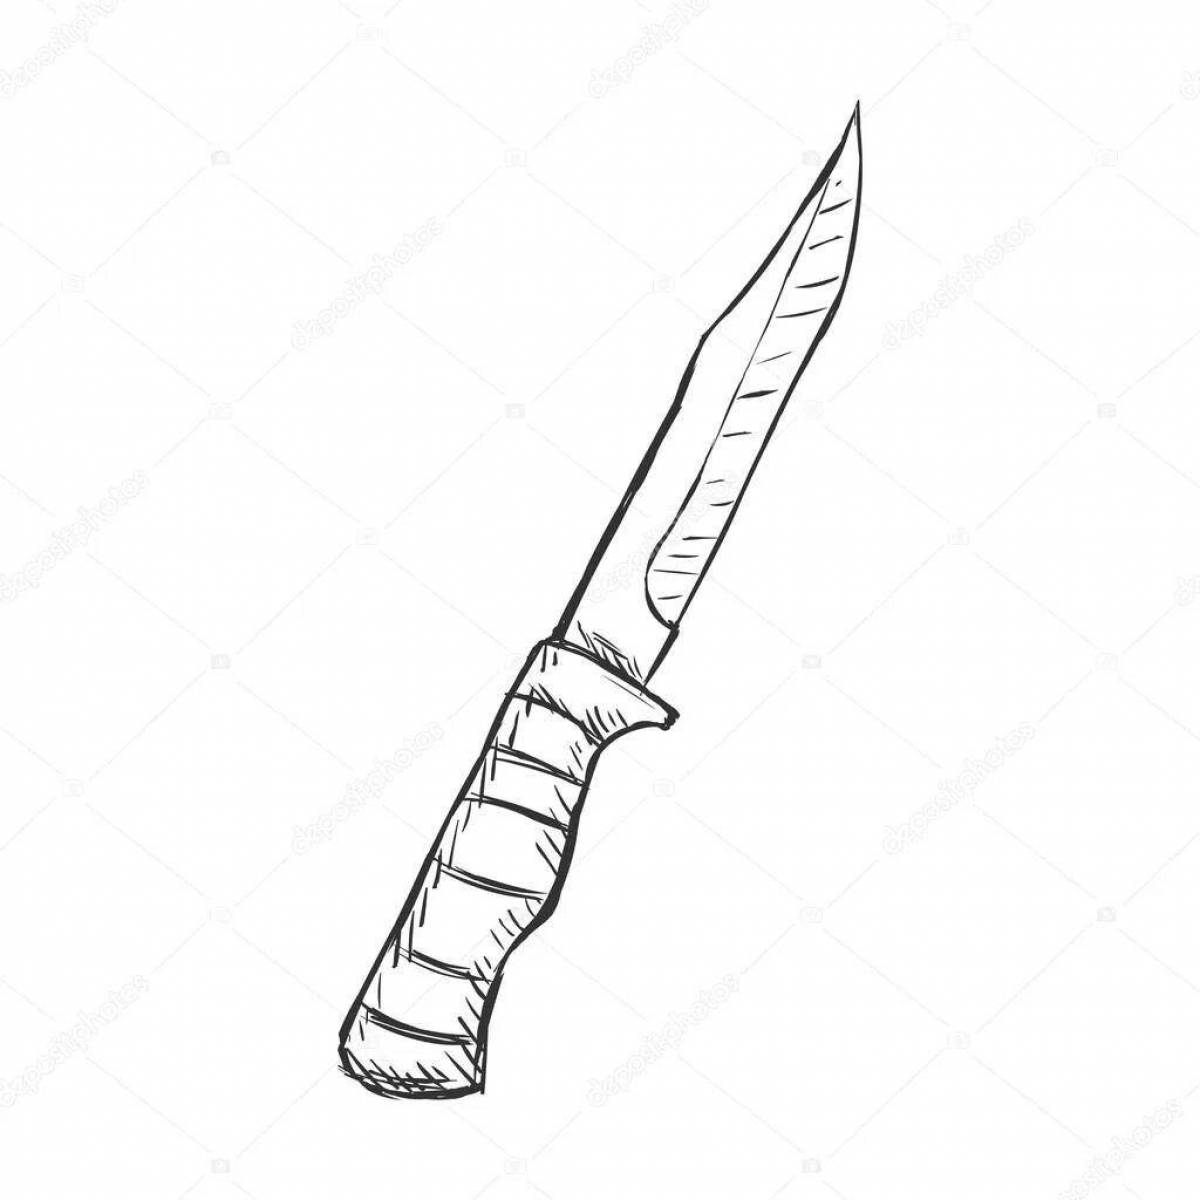 Brilliant tanto from standoff 2 coloring page